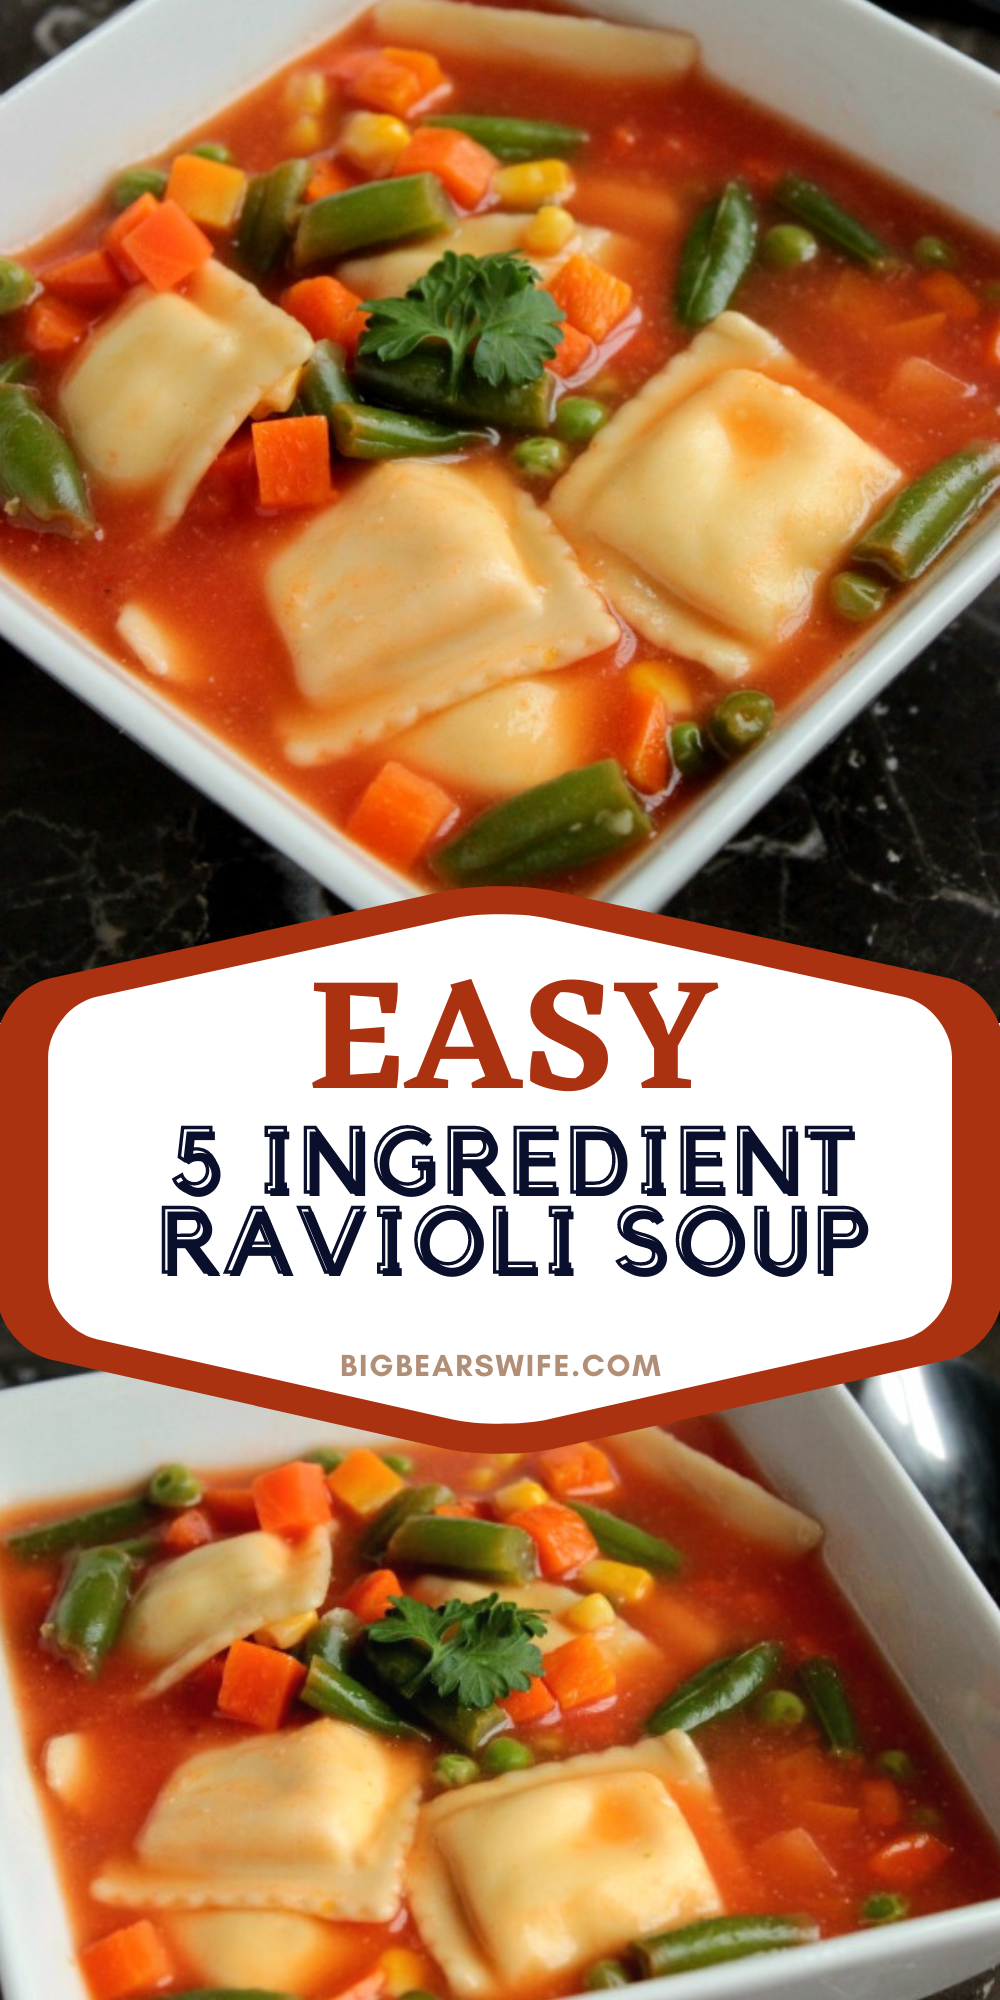 5 Ingredient Ravioli Soup is just that, ravioli soup that's simply made with only 5 ingredients. This super easy soup recipe is great for winter nights or fall evenings. It's a super easy dinner recipes that is super quick to make.  via @bigbearswife